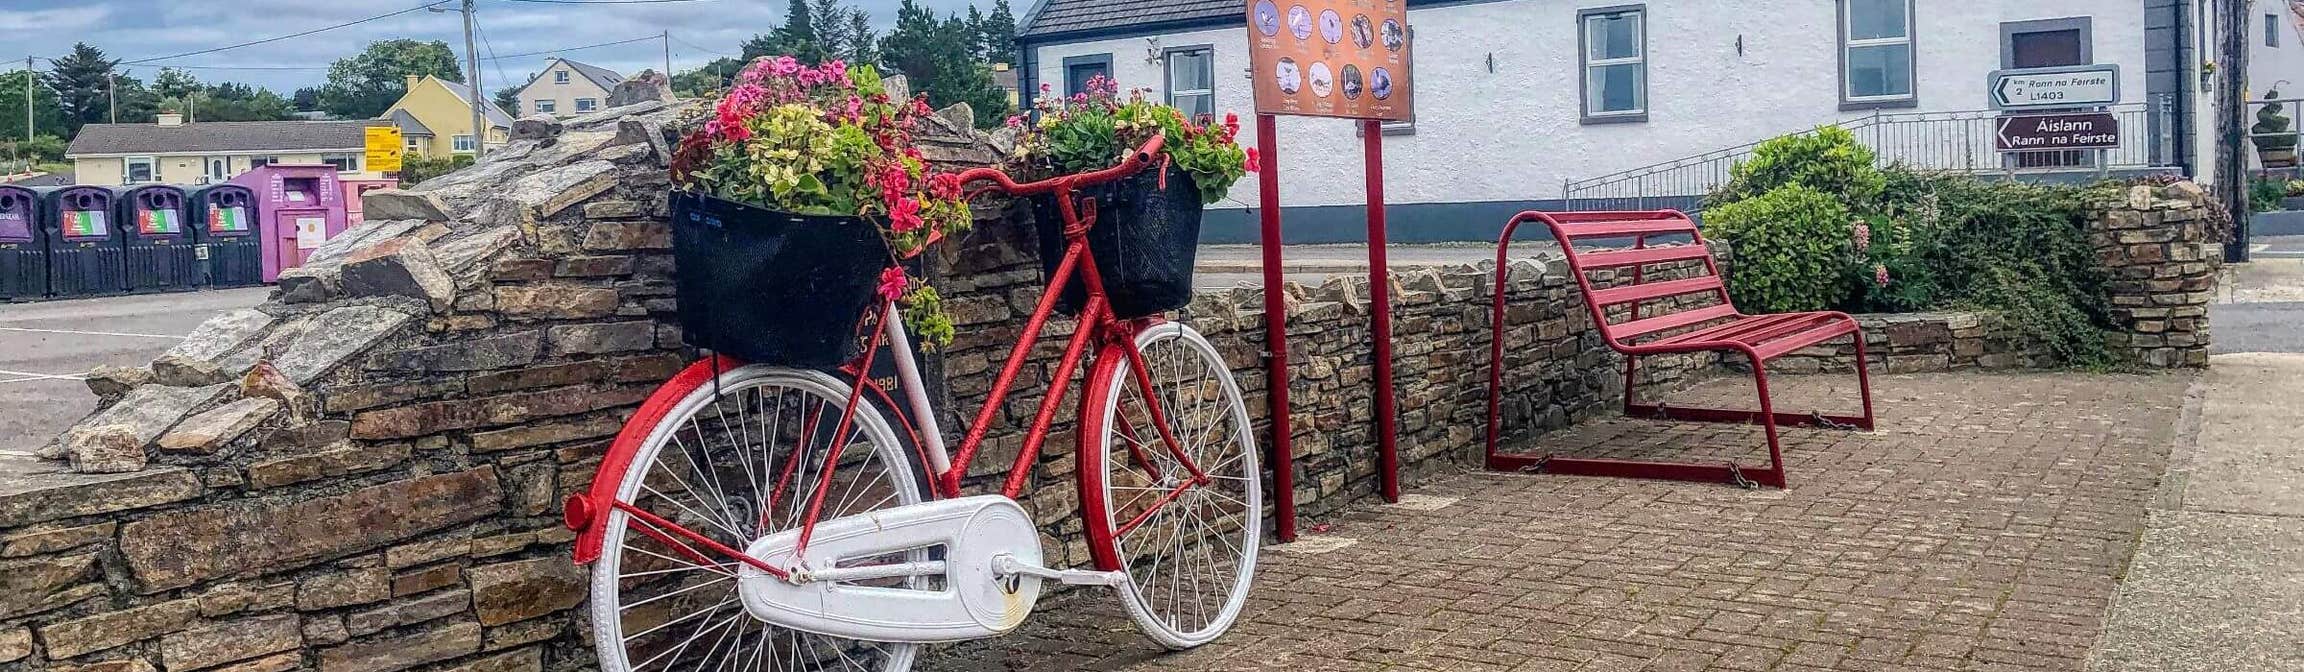 Image of a bike in Annagry in County Donegal